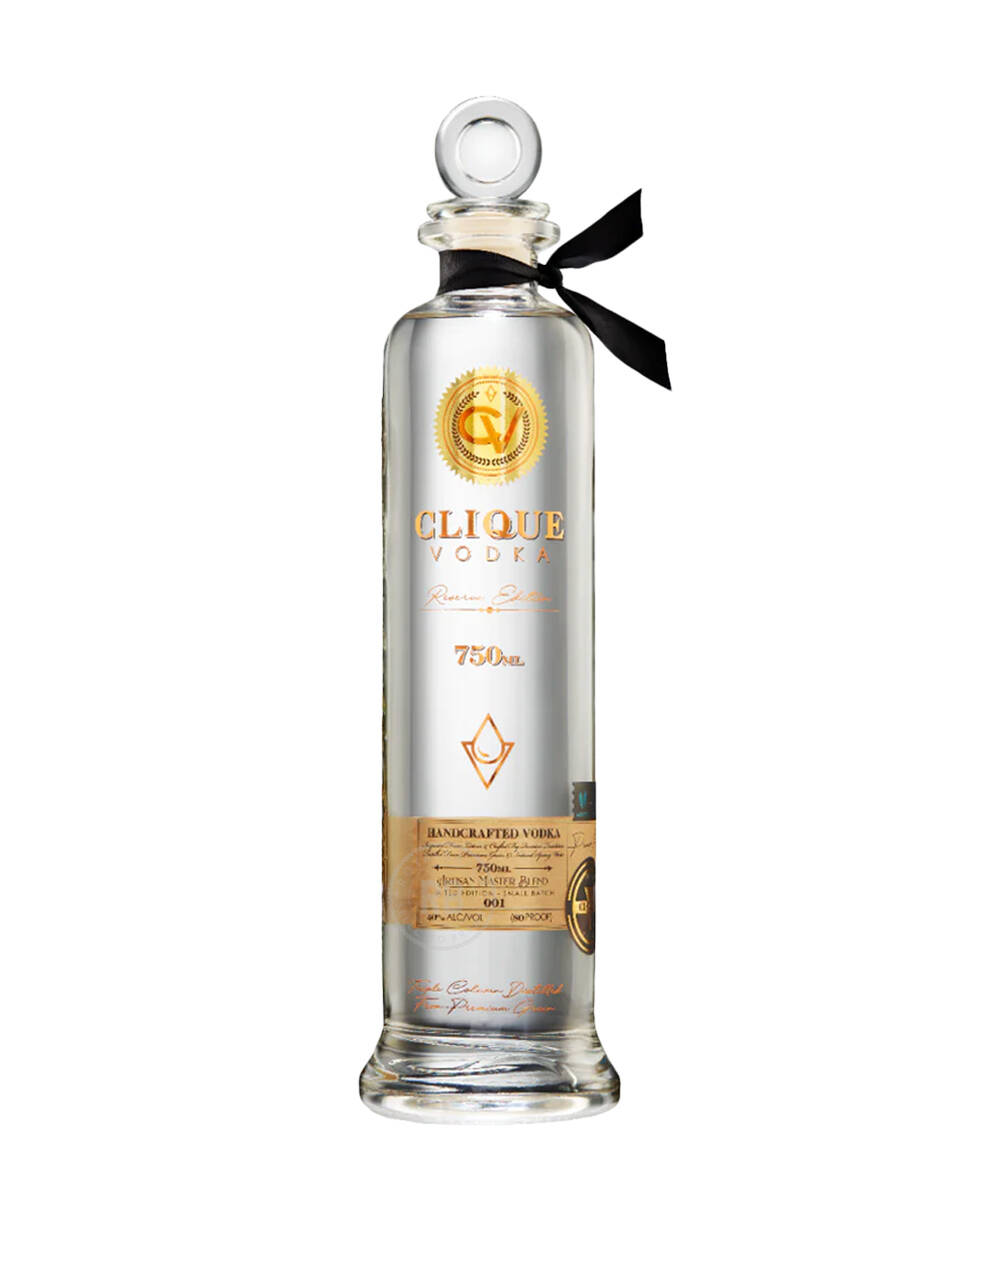 Clique Reserve Edition Artisan Master Blend Small Batch 001 Handcrafted Vodka